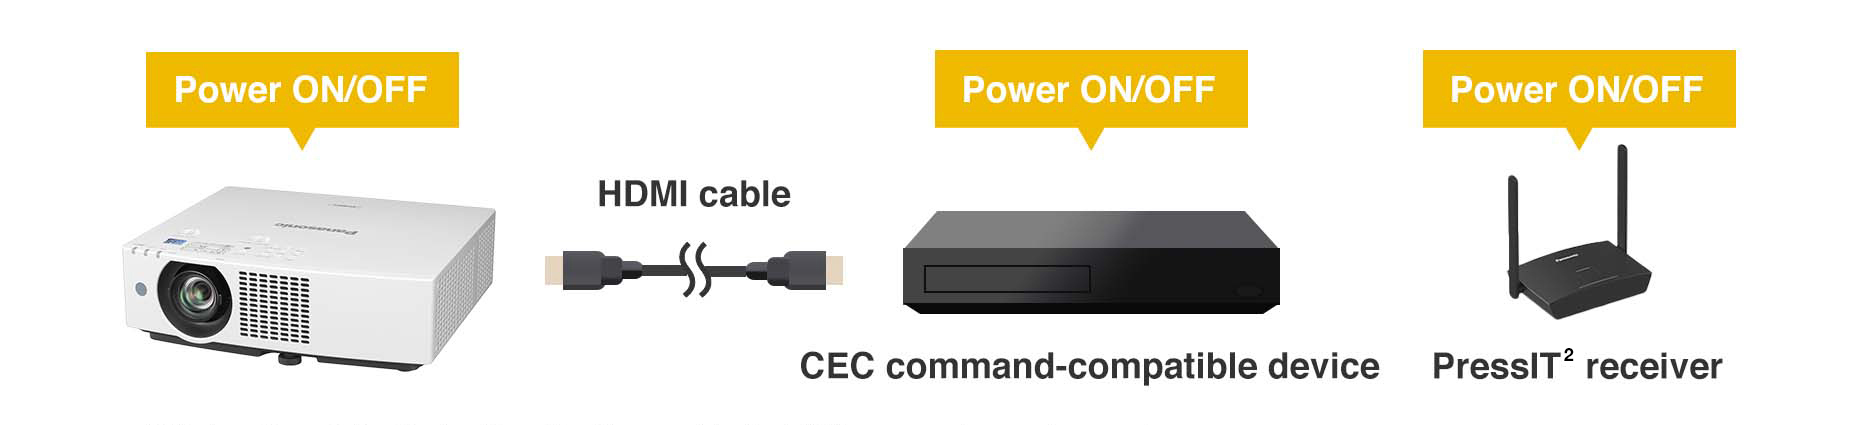 Easy Operation with 2x CEC Command-Compatible HDMI® Inputs